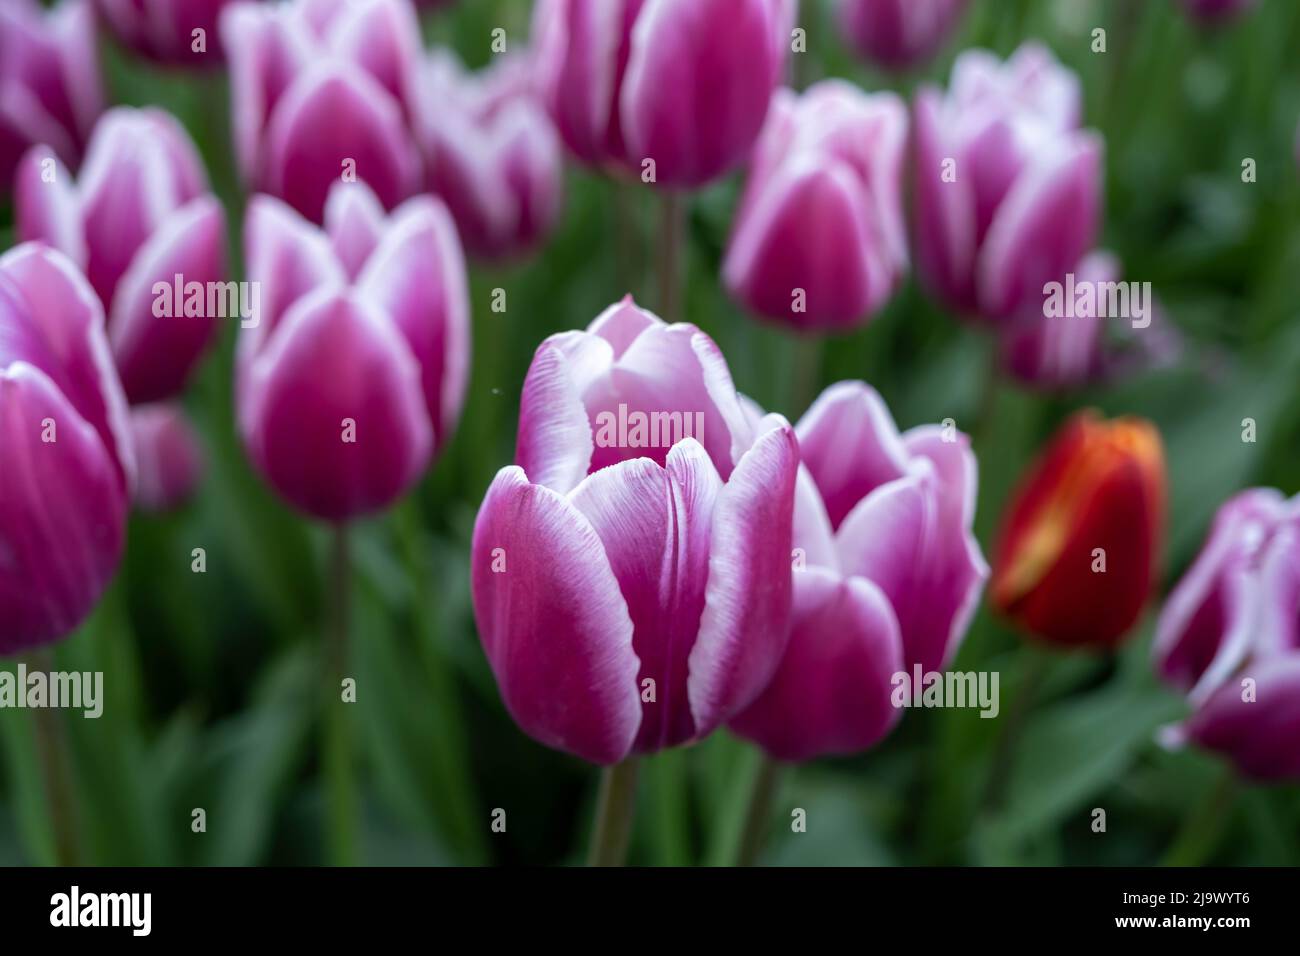 A field of beautiful pink tulips with white edging. Blooming tulip fields in Lithuania. Bright pink with white edges tulip flowers in spring garden Stock Photo